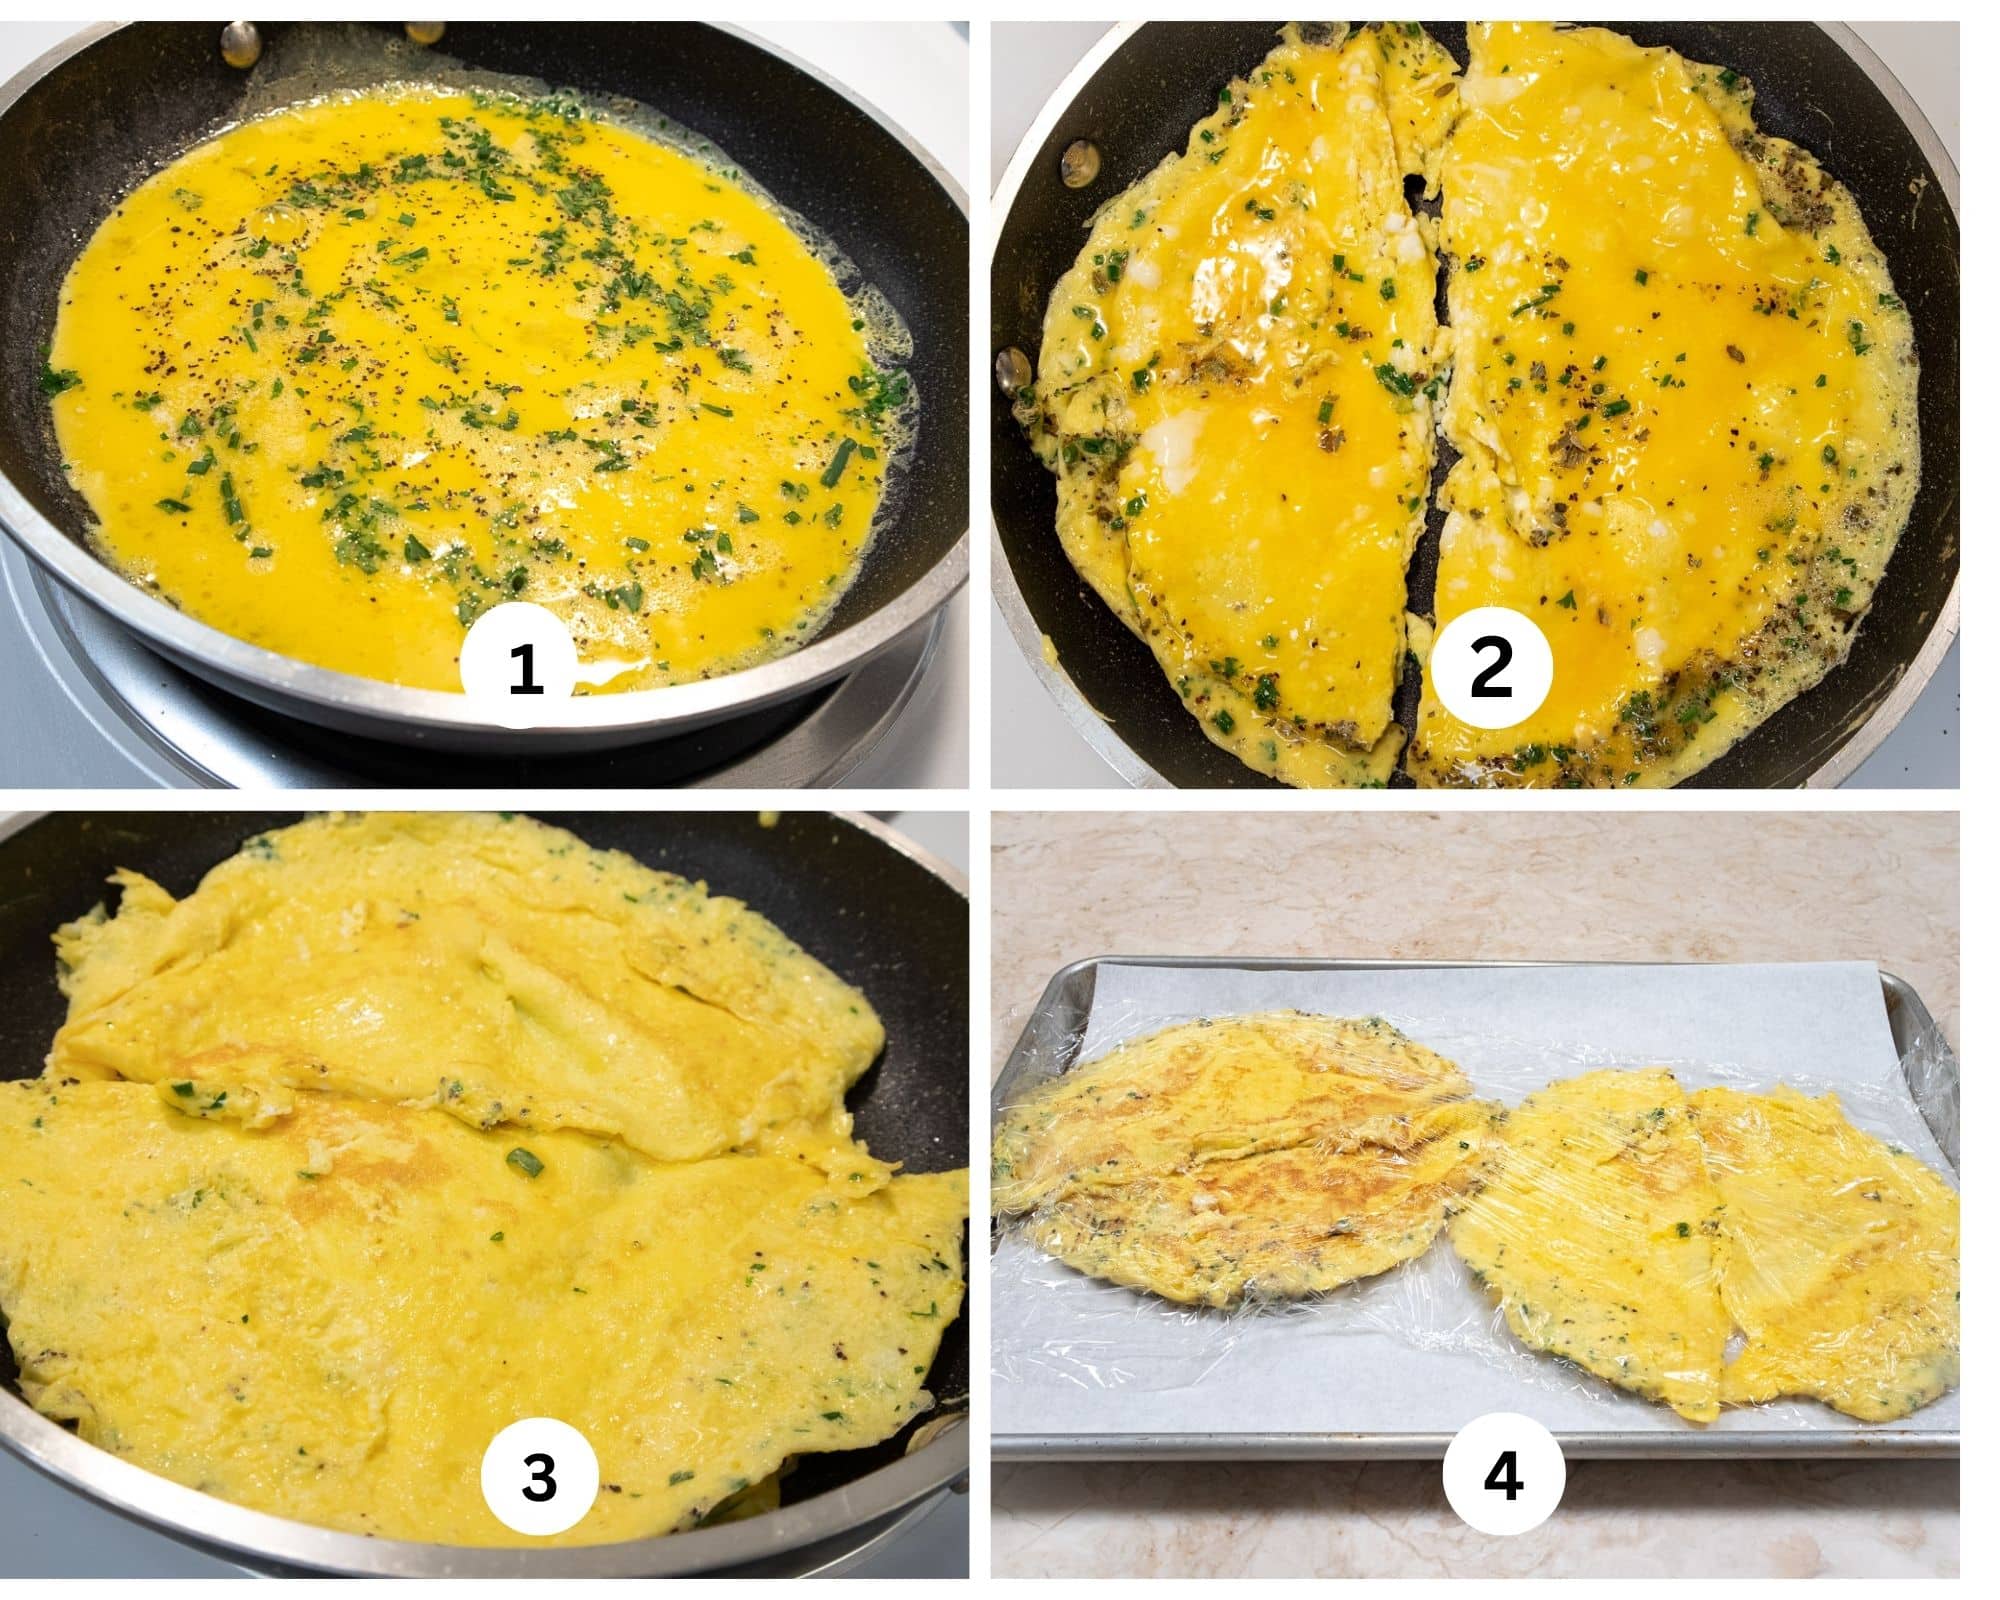 The first collage for Tourte Milanese shows the omlets being made, cut in h alf, flipped and cooling.